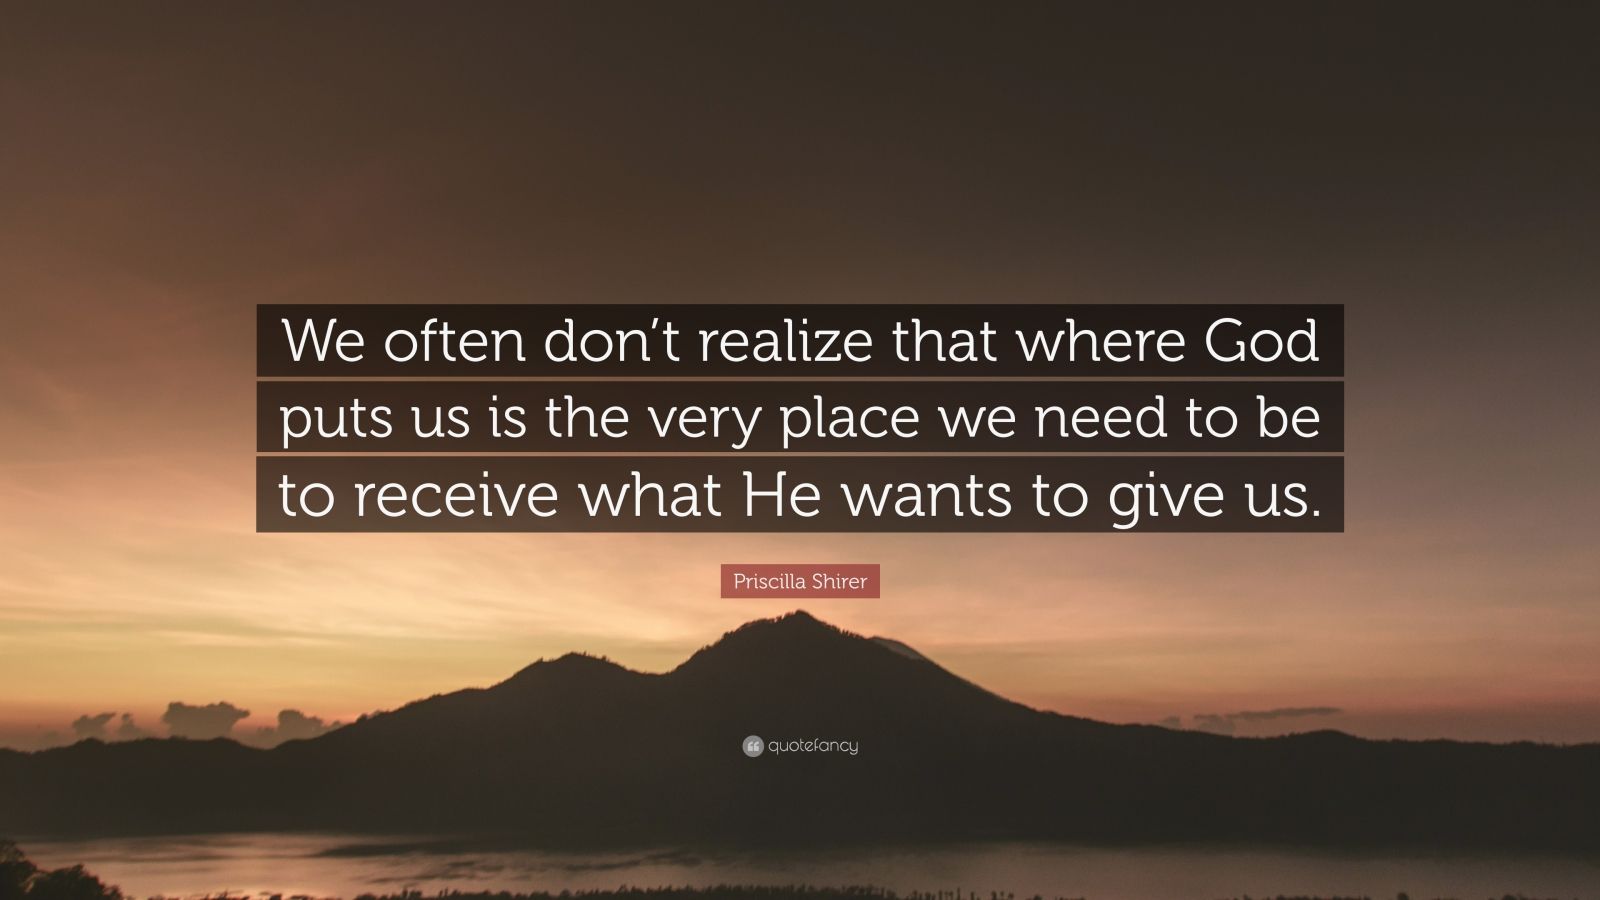 Priscilla Shirer Quote: “We often don’t realize that where God puts us ...